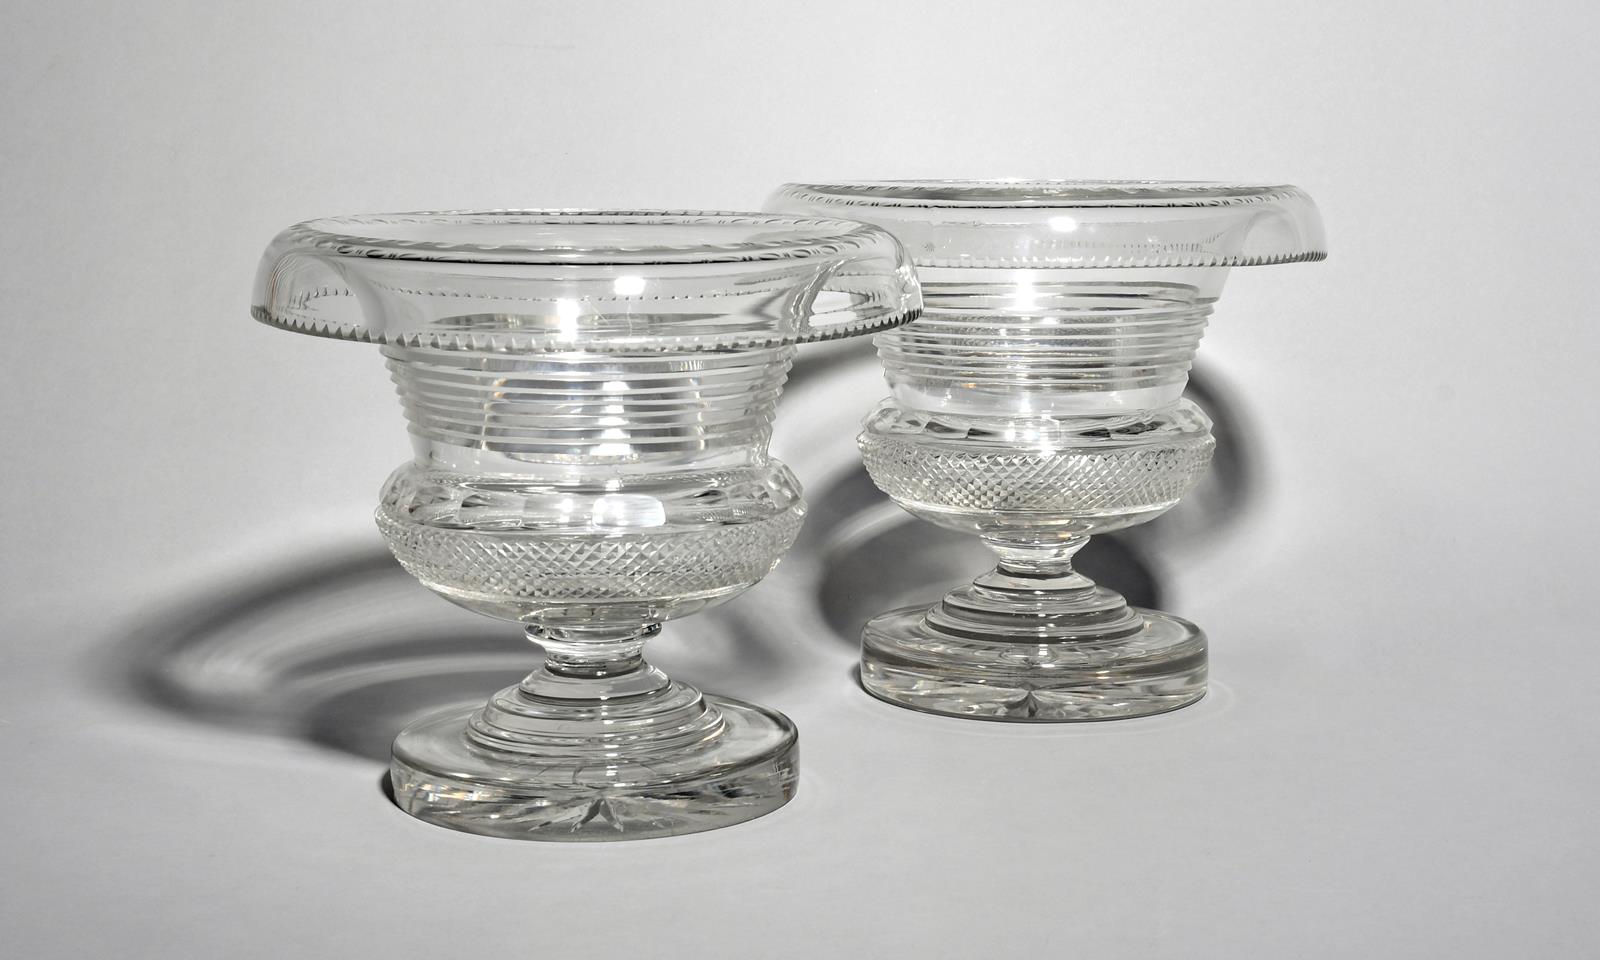 A large pair of Irish glass vases or centrepieces 19th century, of campana shape, cut with a hobnail